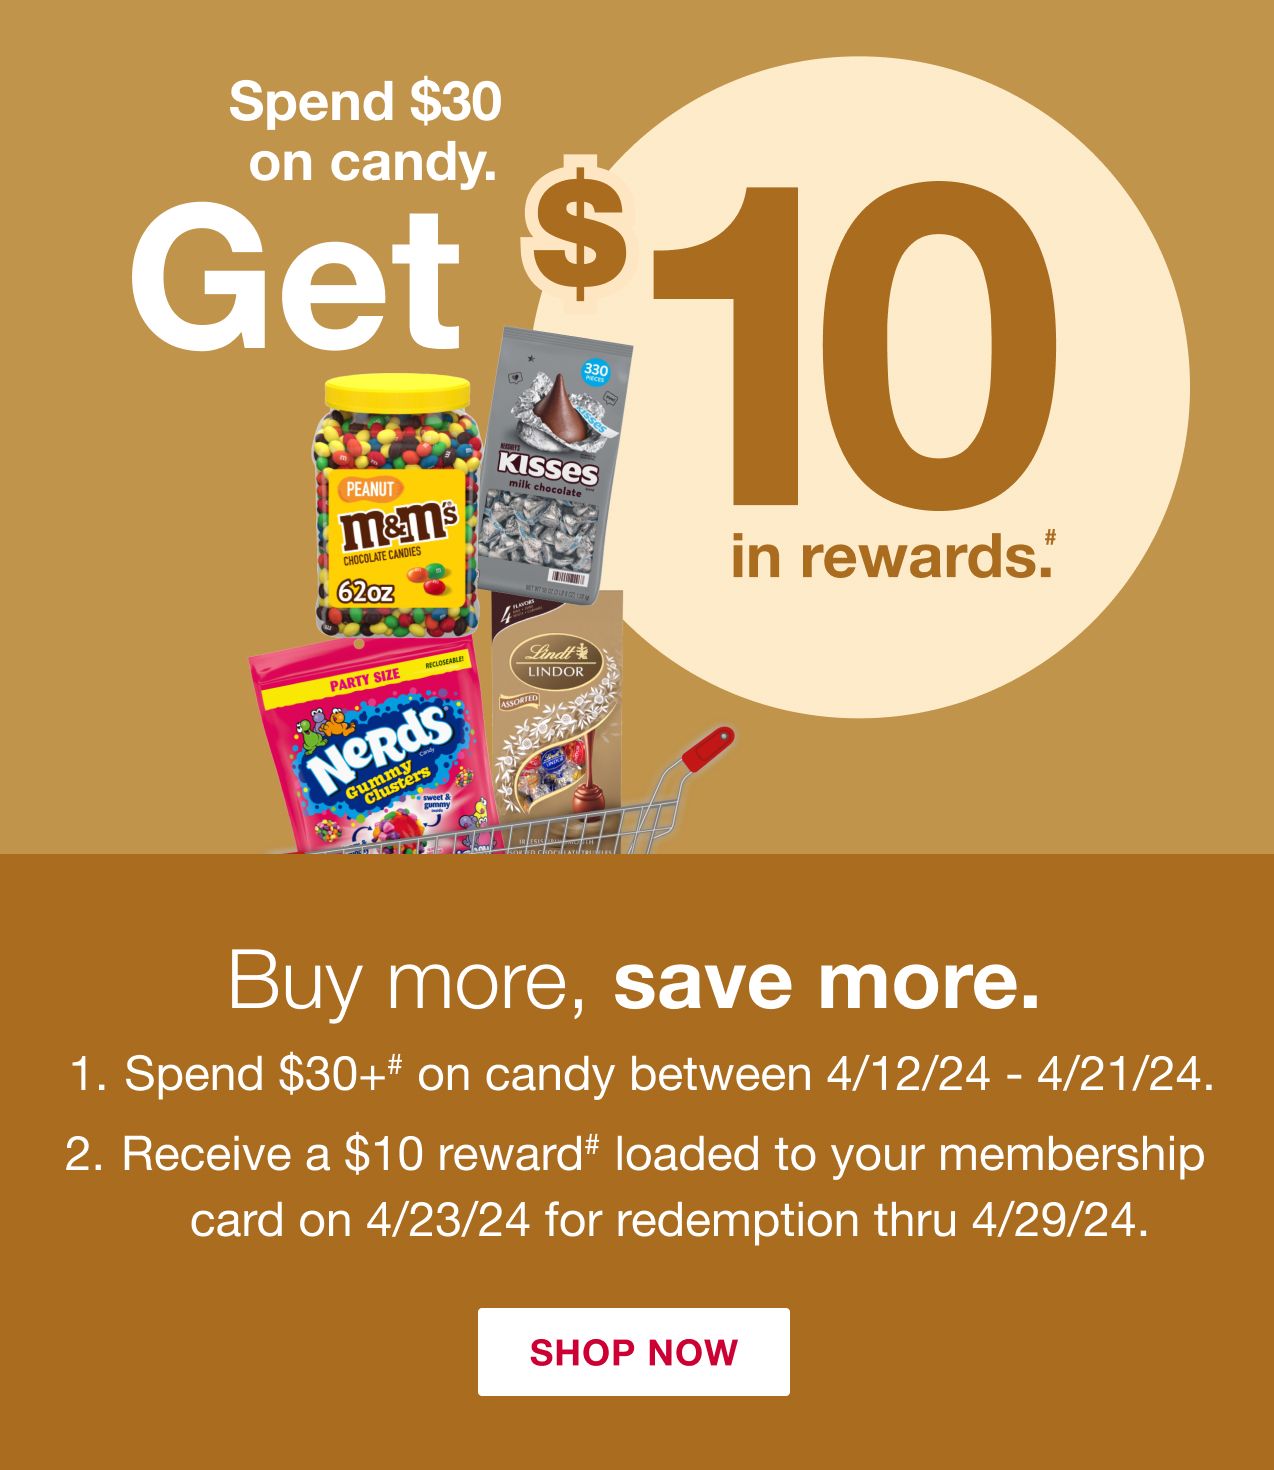 Spend $30 on Candy, get $10 in rewards.# Buy more, save more. 1. Spend $30+# on candy between 4/12/24 - 4/21/24. 2. Receive a $10 reward# loaded to your membership card on 4/23/24 for redemption thru 4/29/24. Click here to shop now